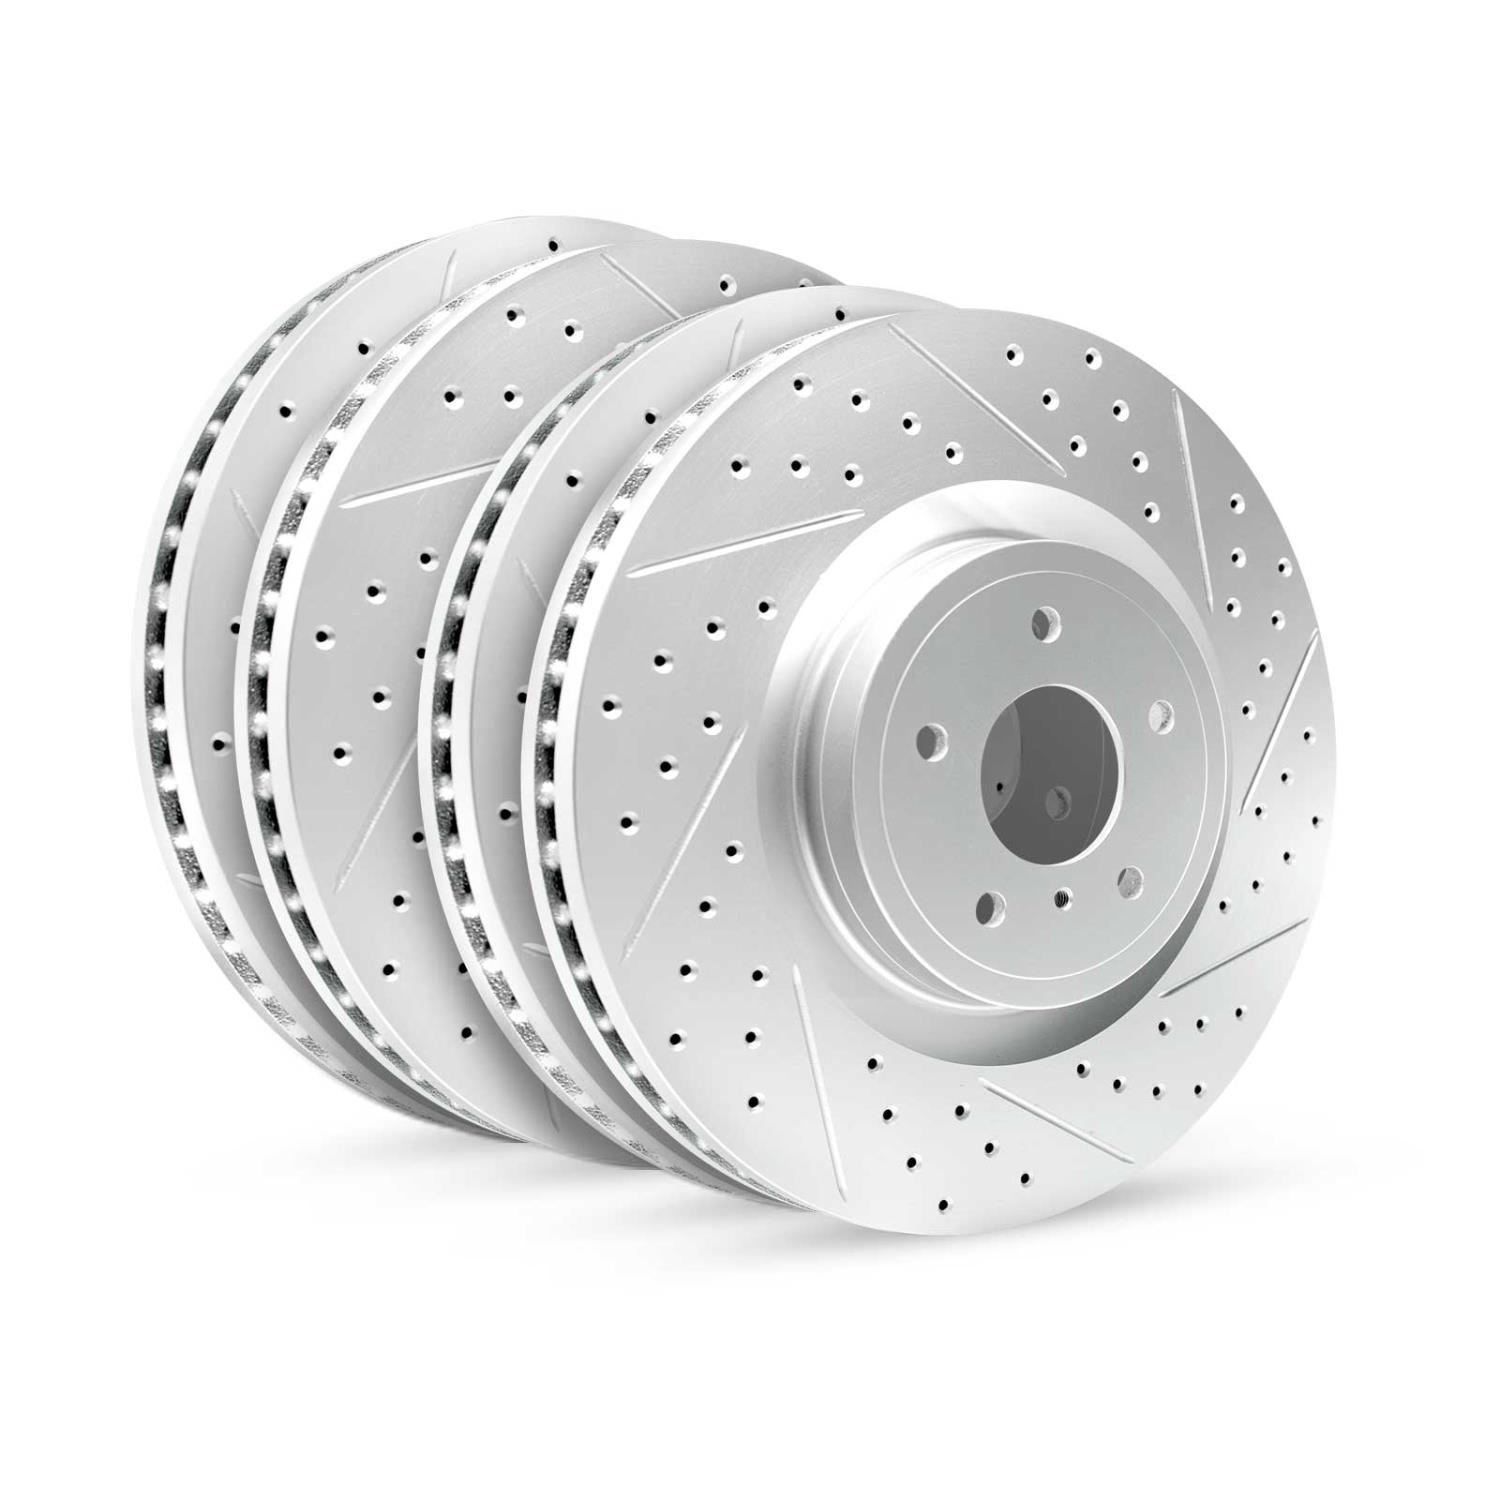 GEO-Carbon Drilled/Slotted Rotors, 2005-2008 Ford/Mazda,